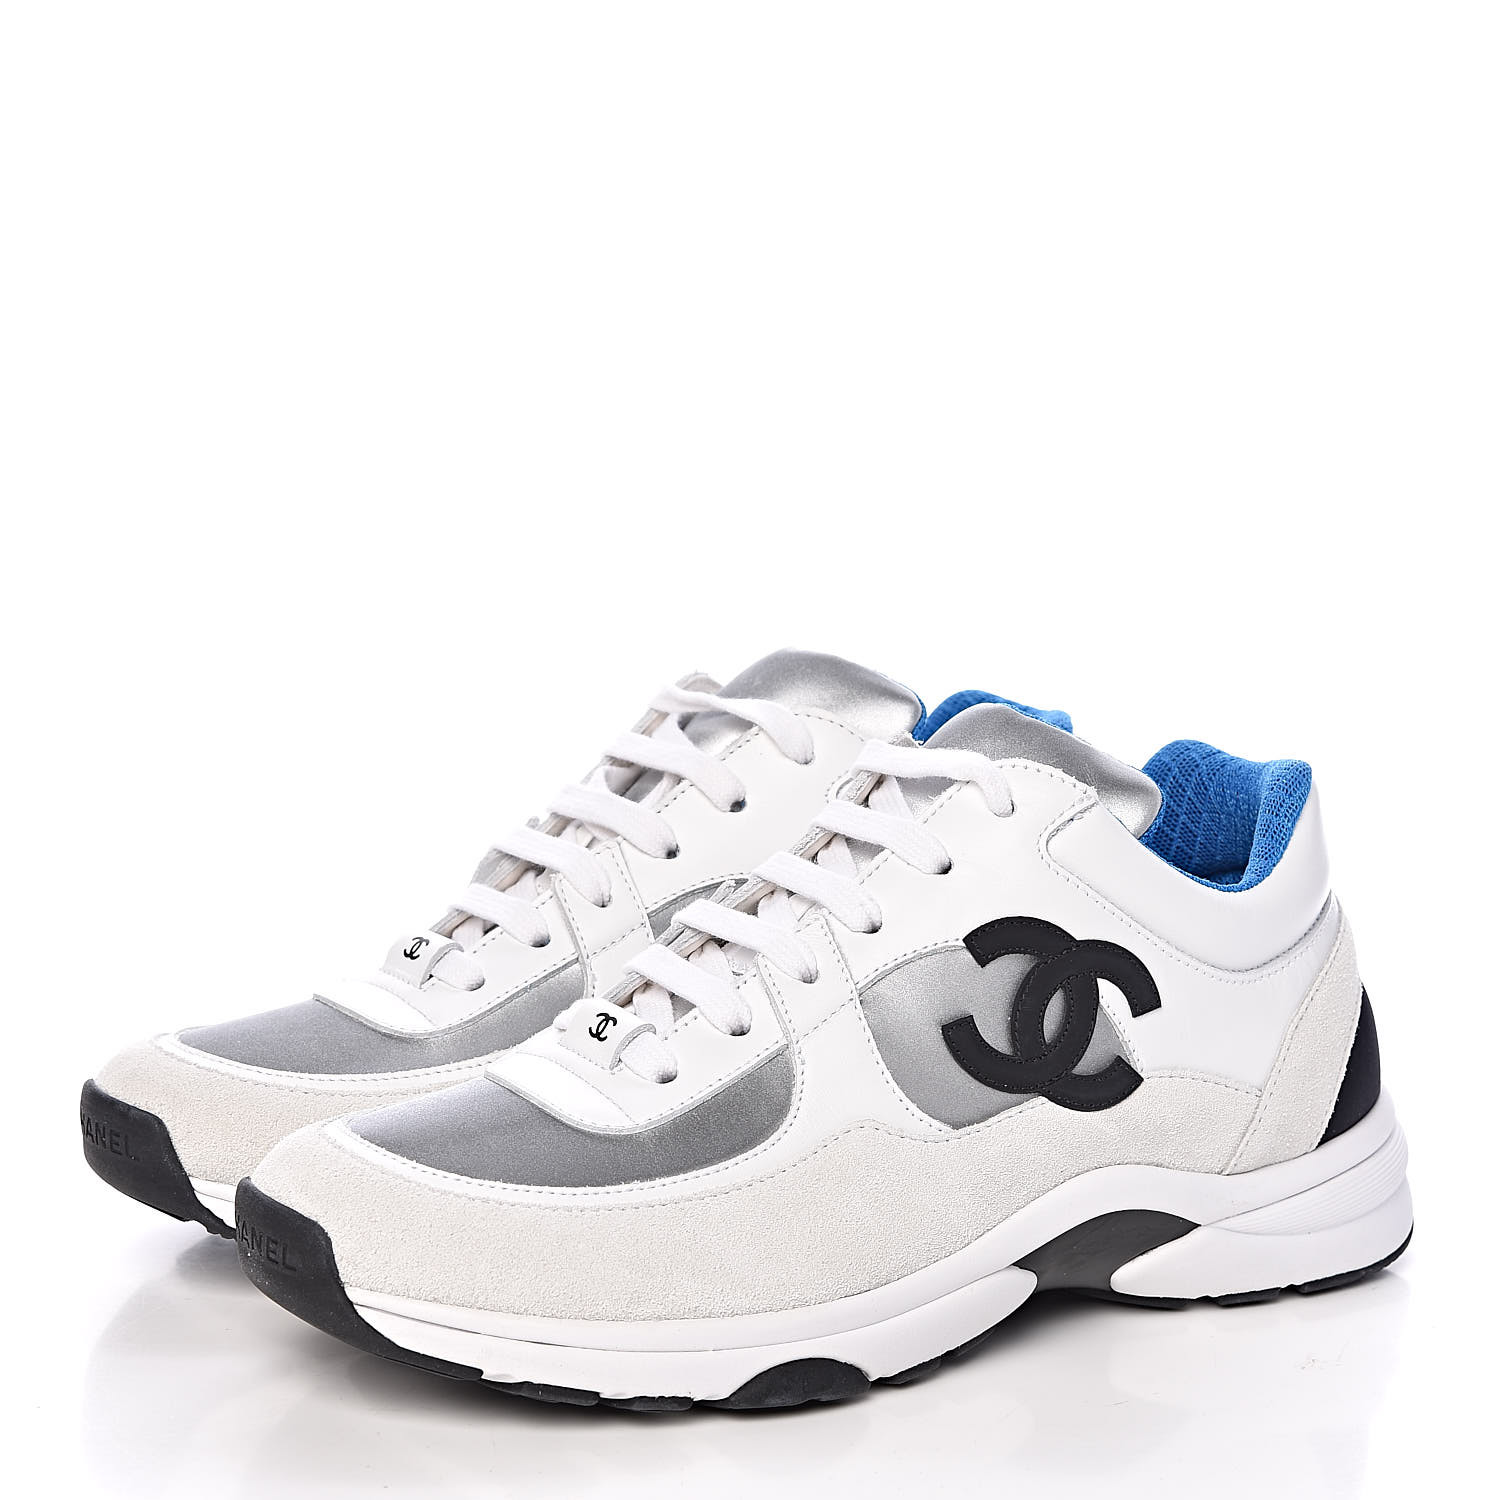 CHANEL Suede Calfskin Womens CC Sneakers 39.5 White Silver Blue 425617